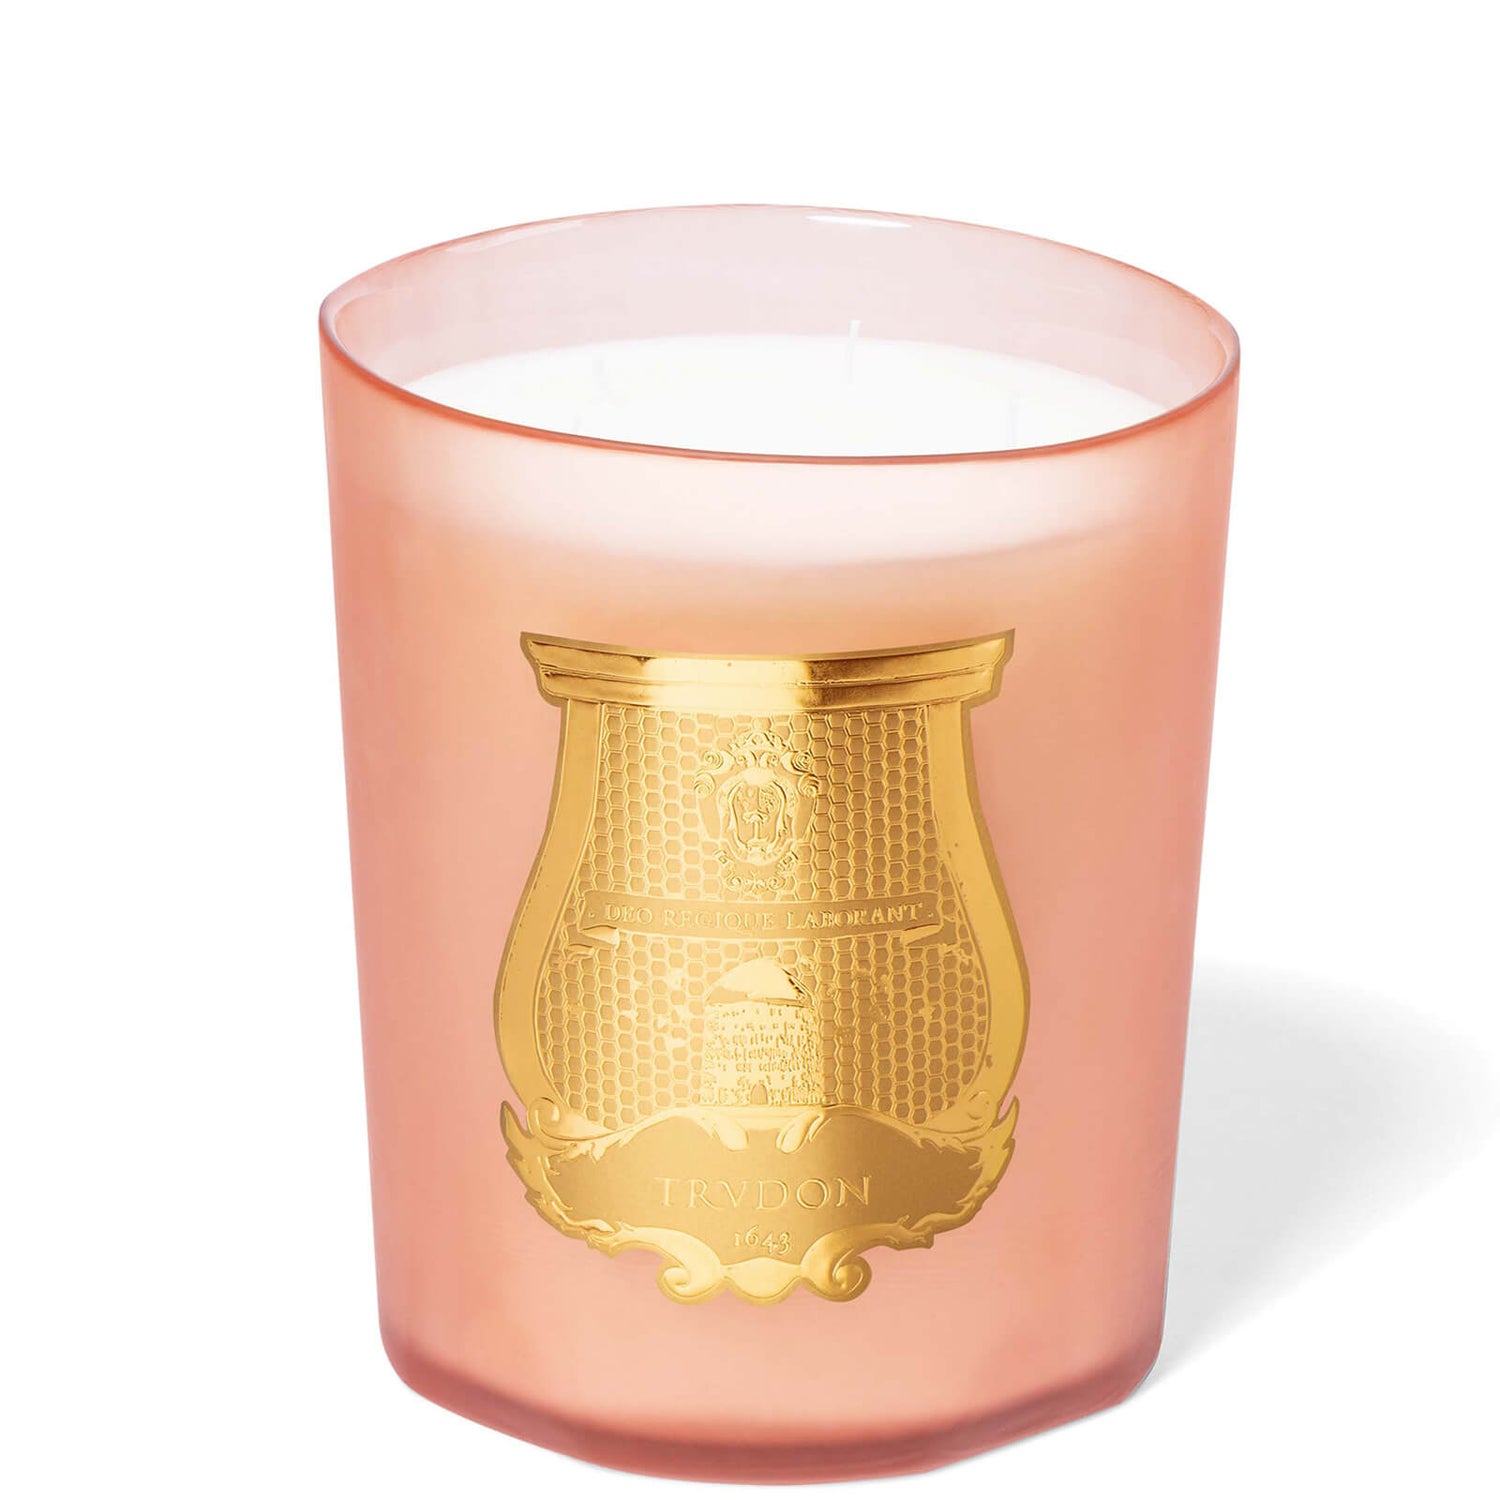 TRUDON Scented Candle 800g - Tuileries